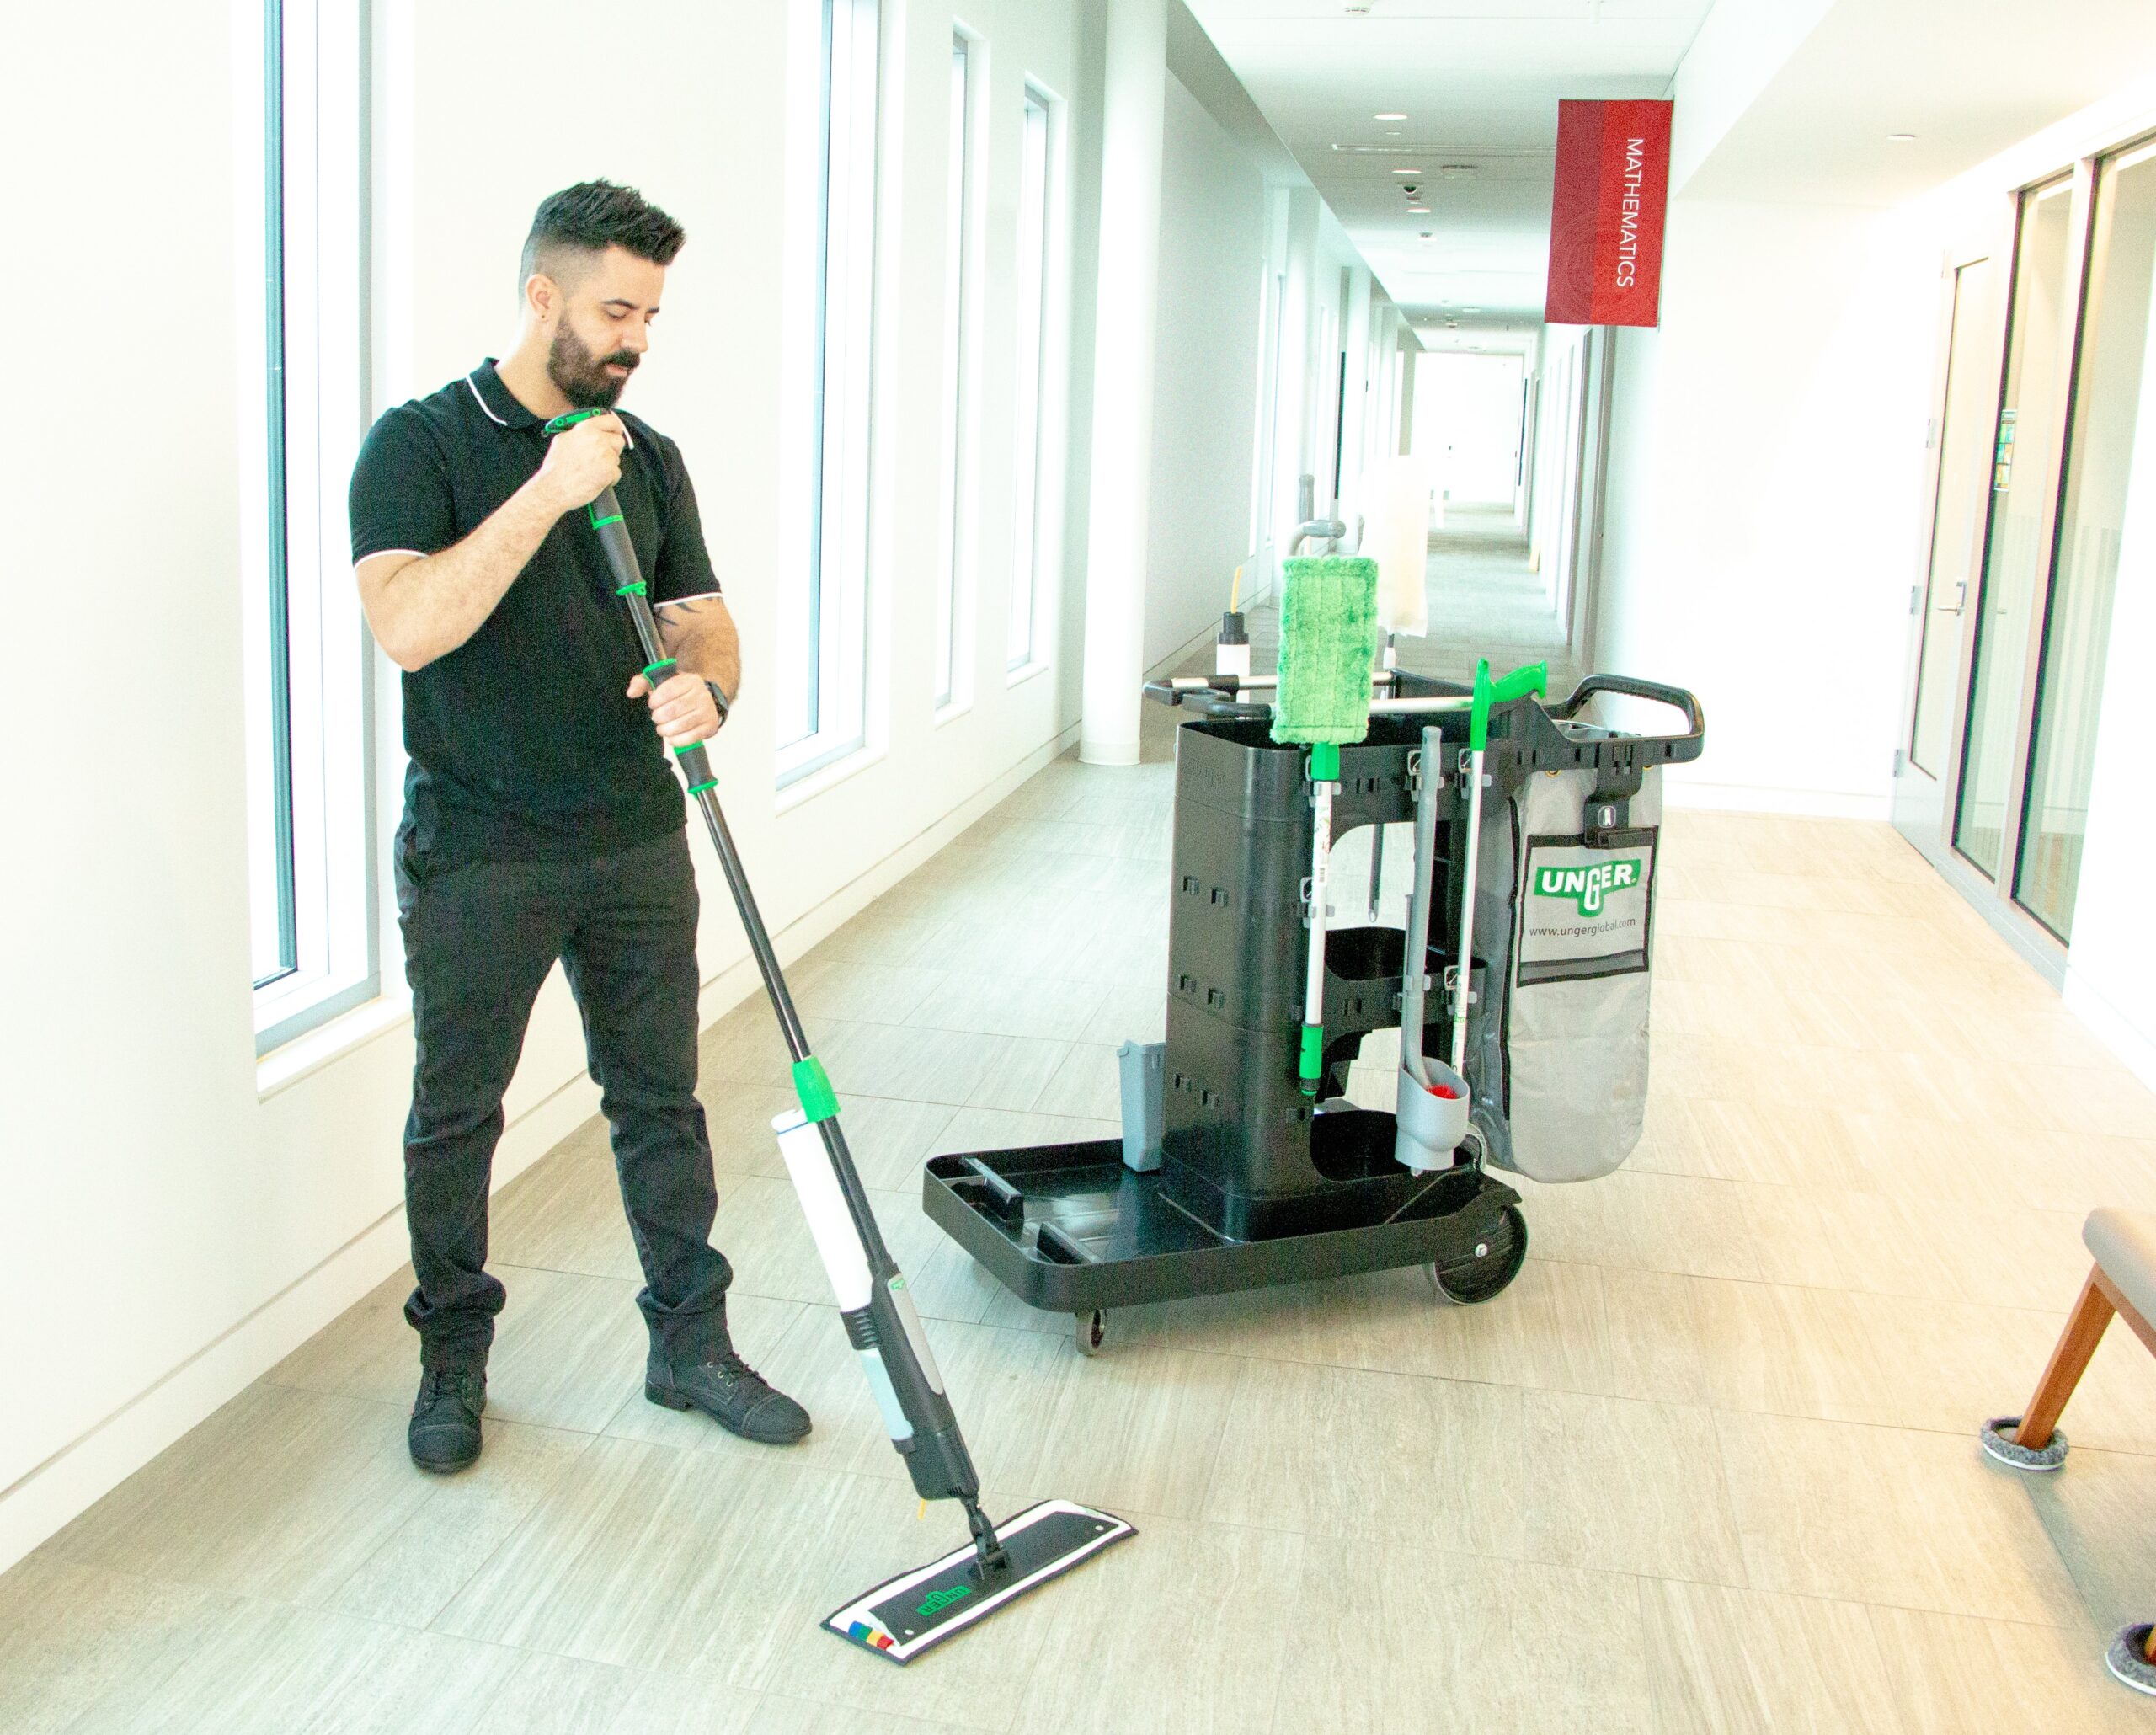 IMG_3229_CRTSP_UE_SpotCleanRxCart_ProductFeature_InUse_Shot7_Raoul_Mopping_in_Hallway